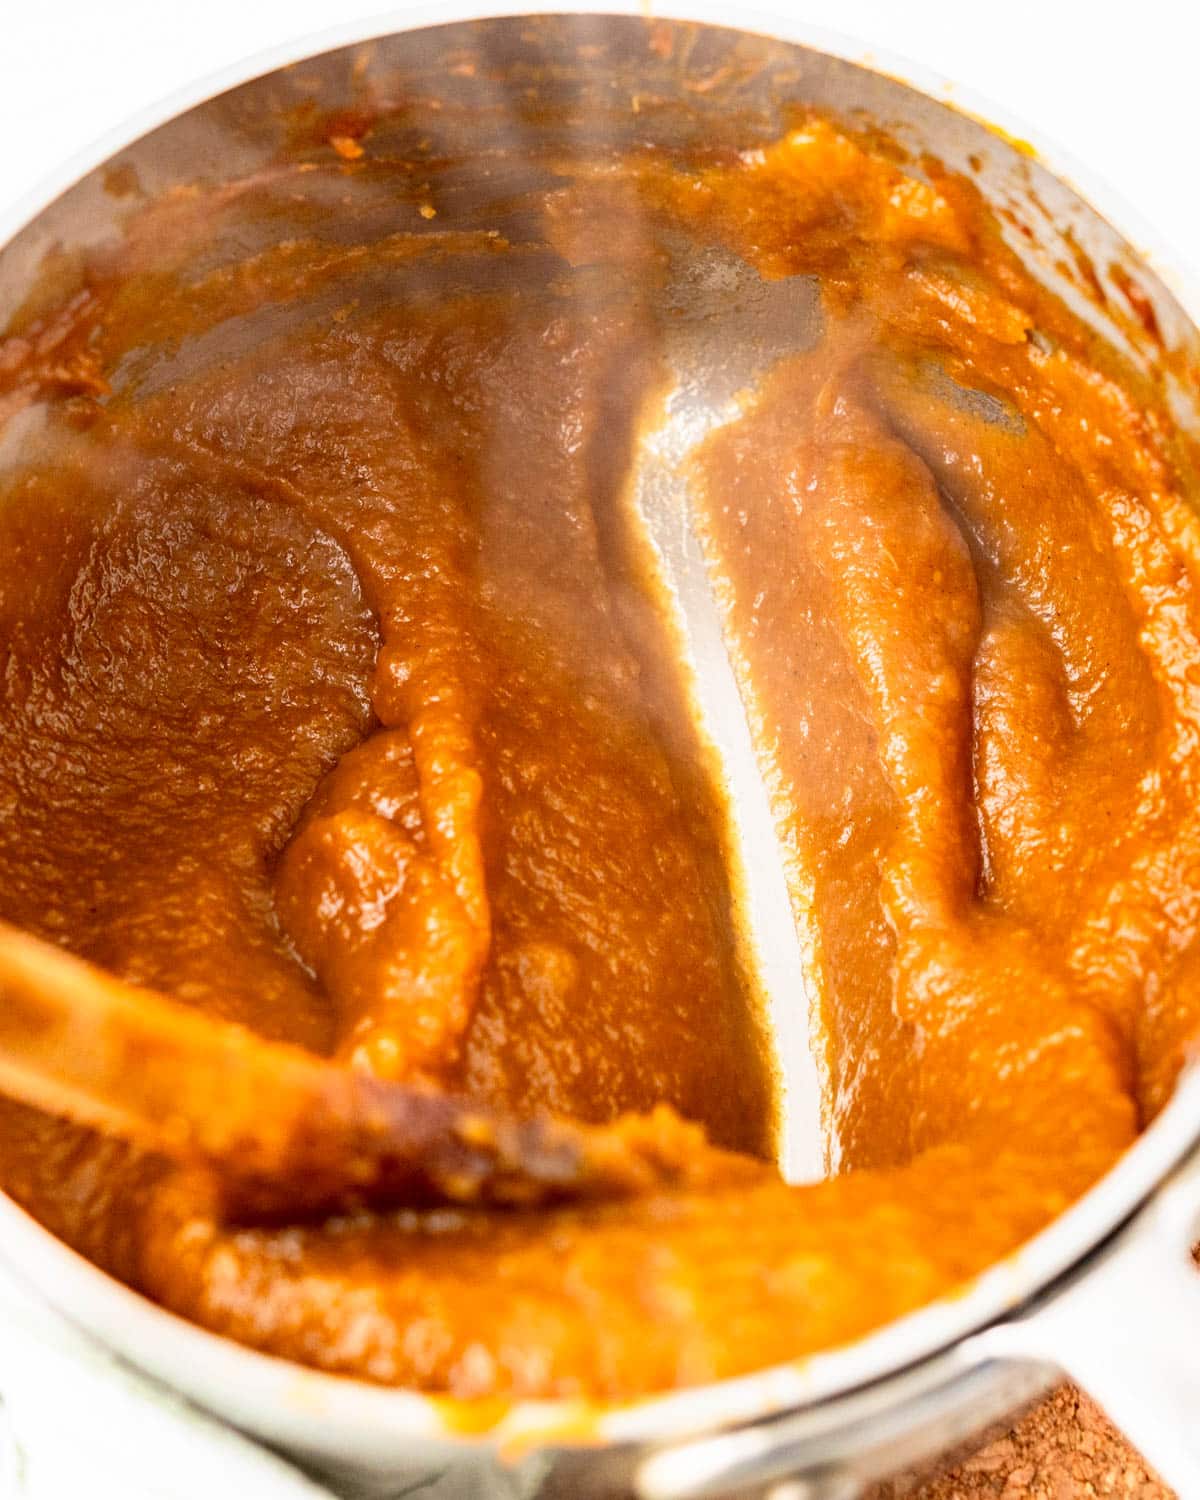 I am running a wooden spoon along the bottom of the pot to see if the pumpkin butter is ready.